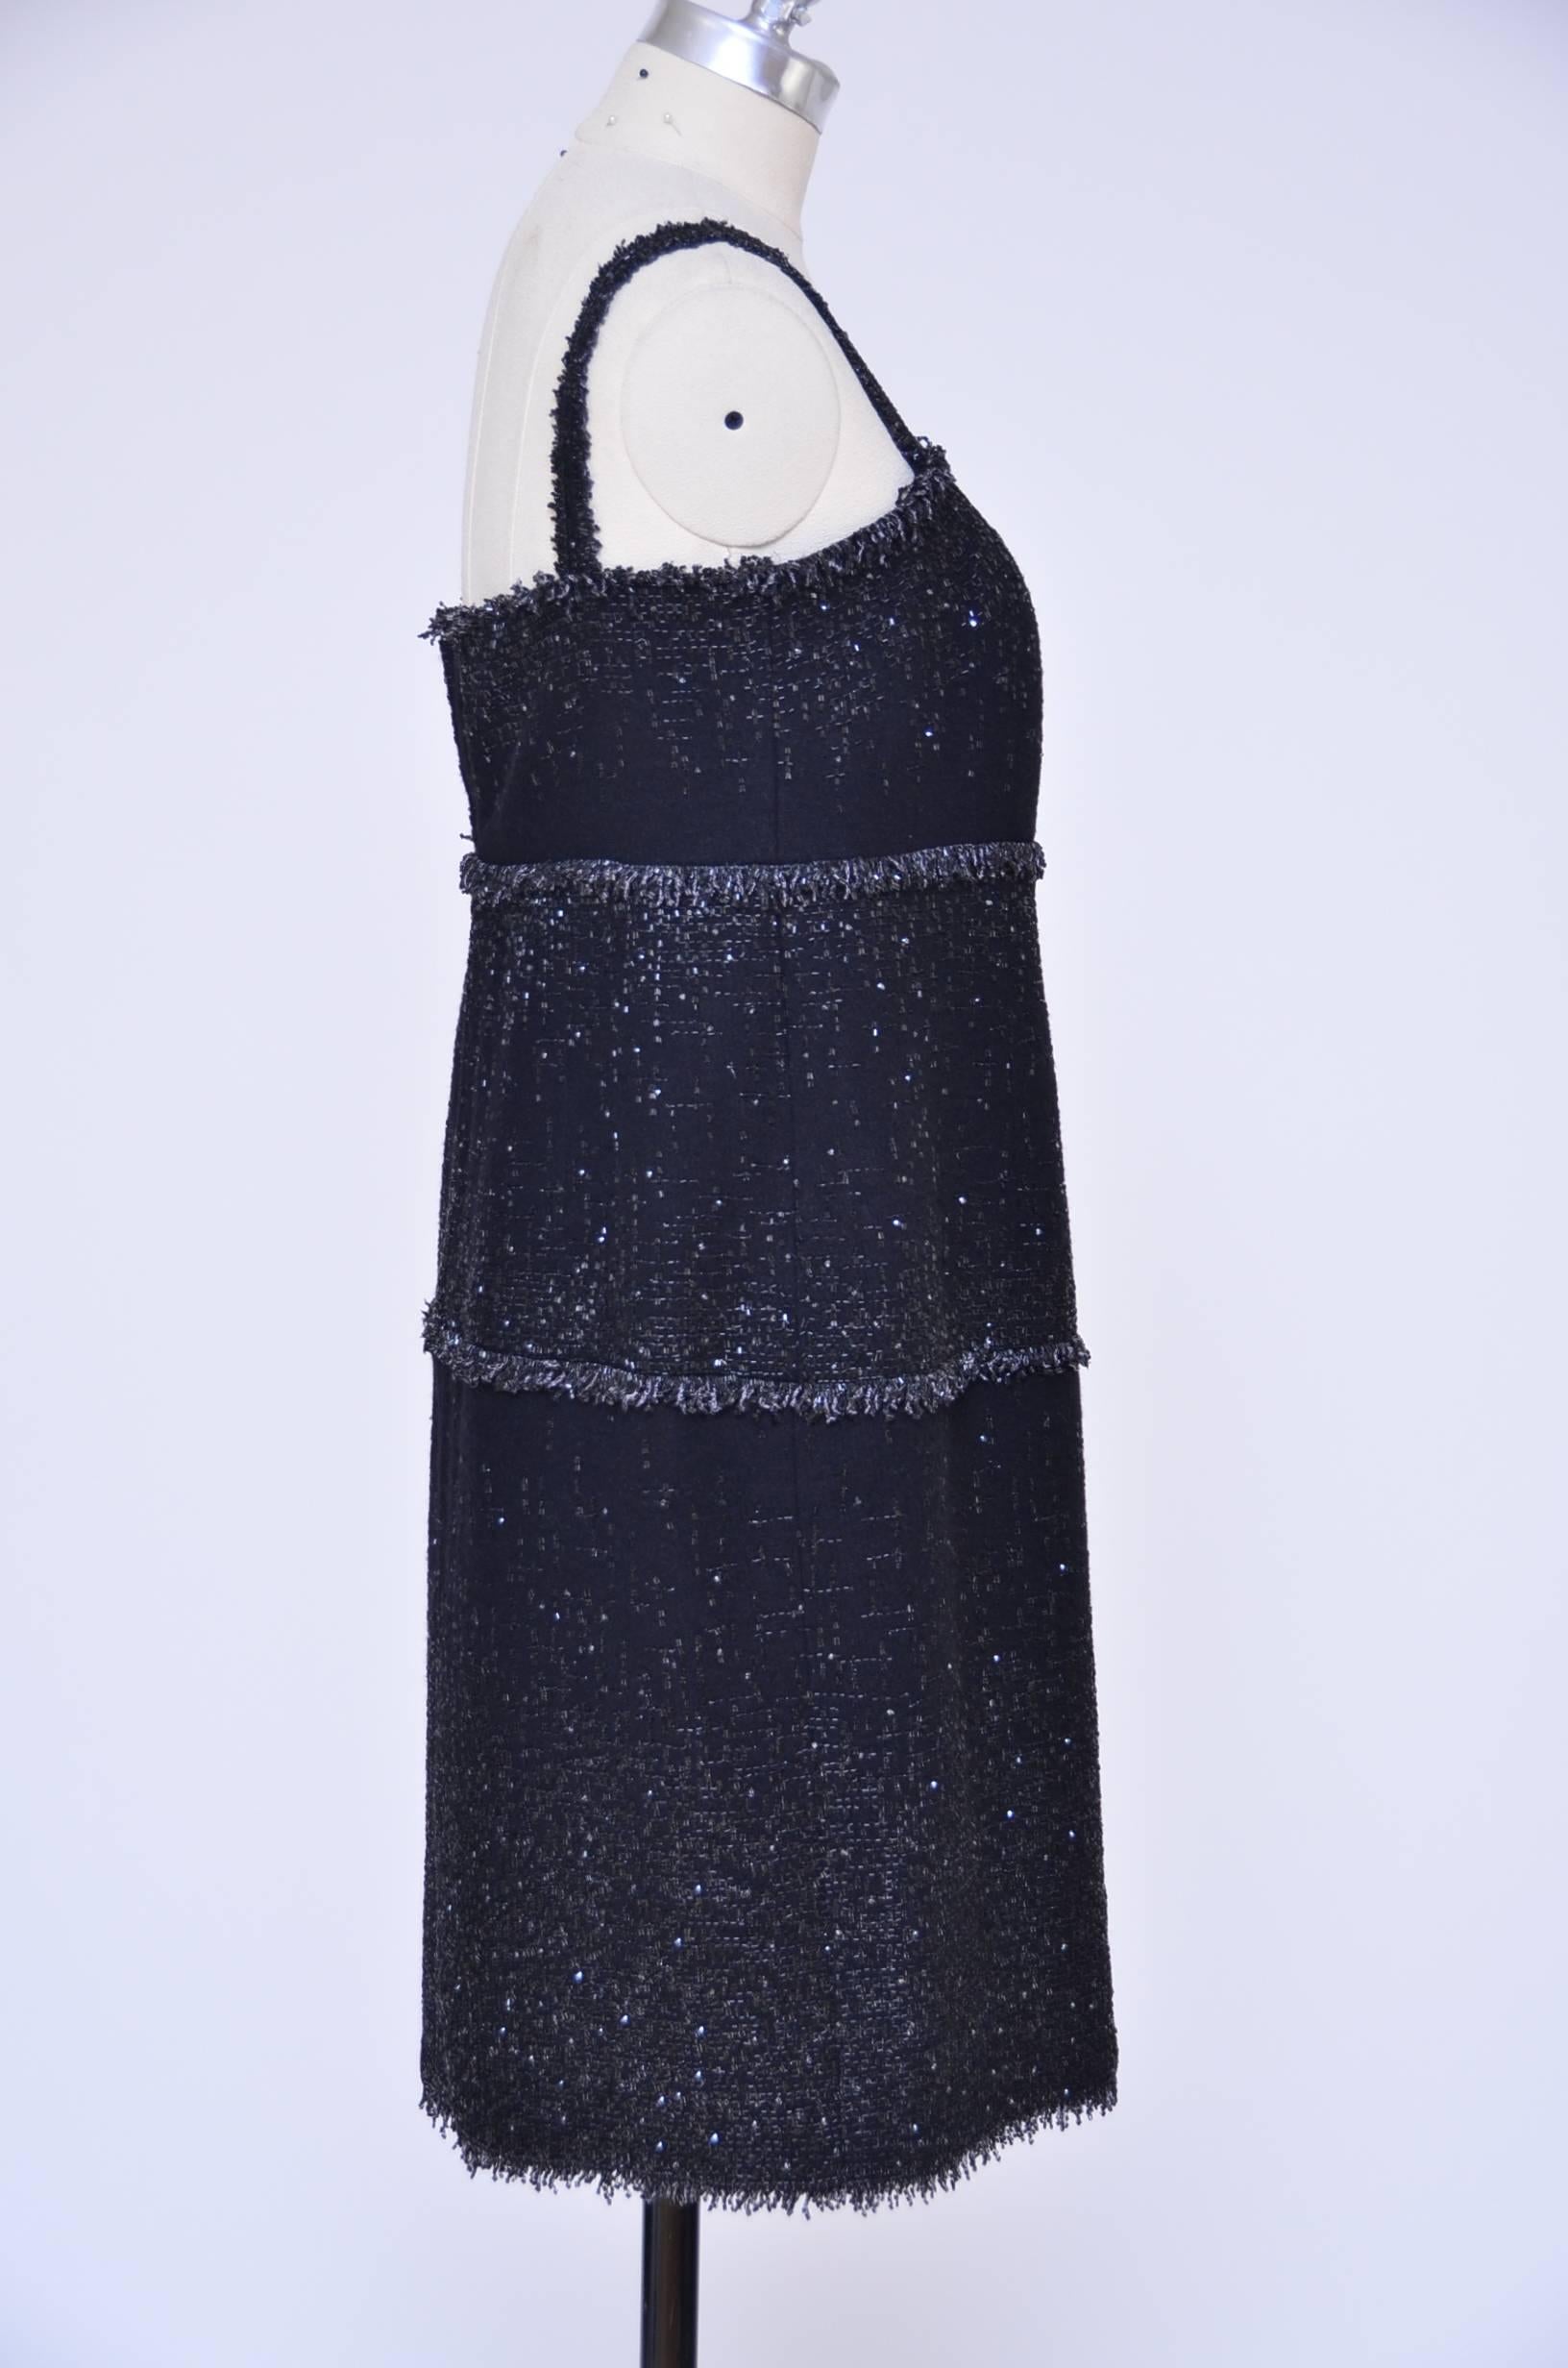 Black CHANEL Haute Couture Beaded Embellished Tweed   Dress   Mint